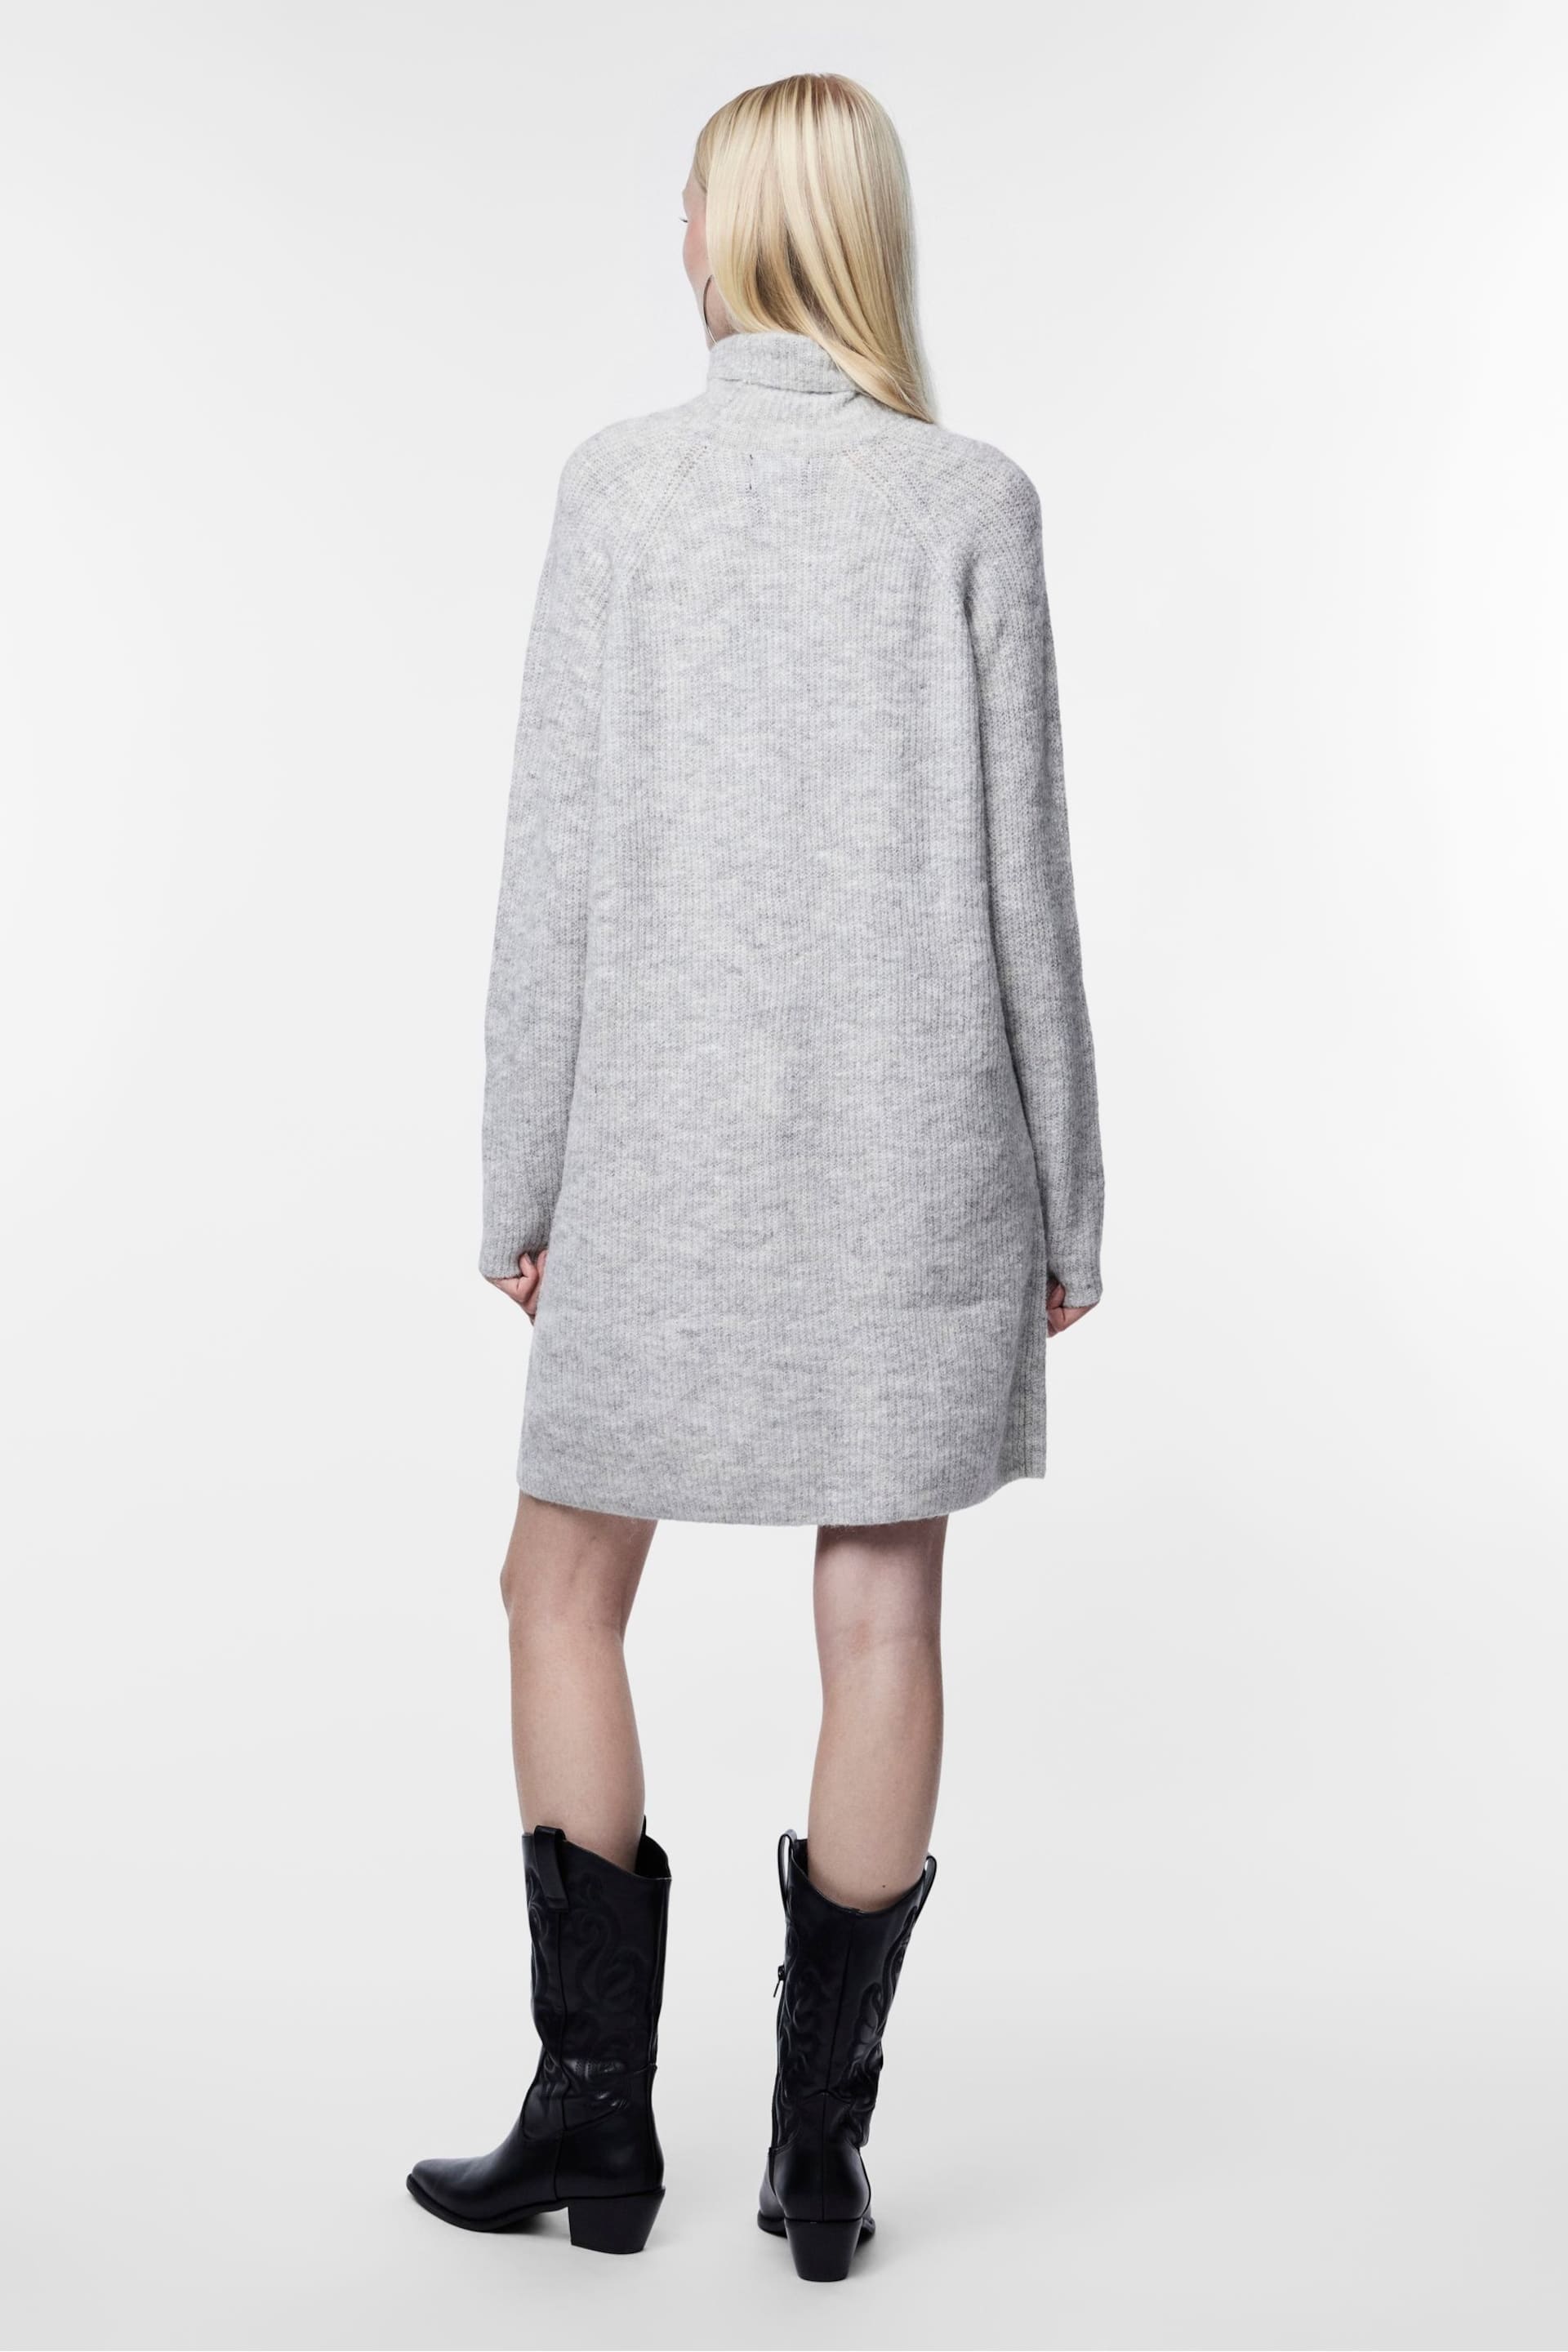 PIECES Grey Roll Neck Knitted Jumper Dress - Image 2 of 5